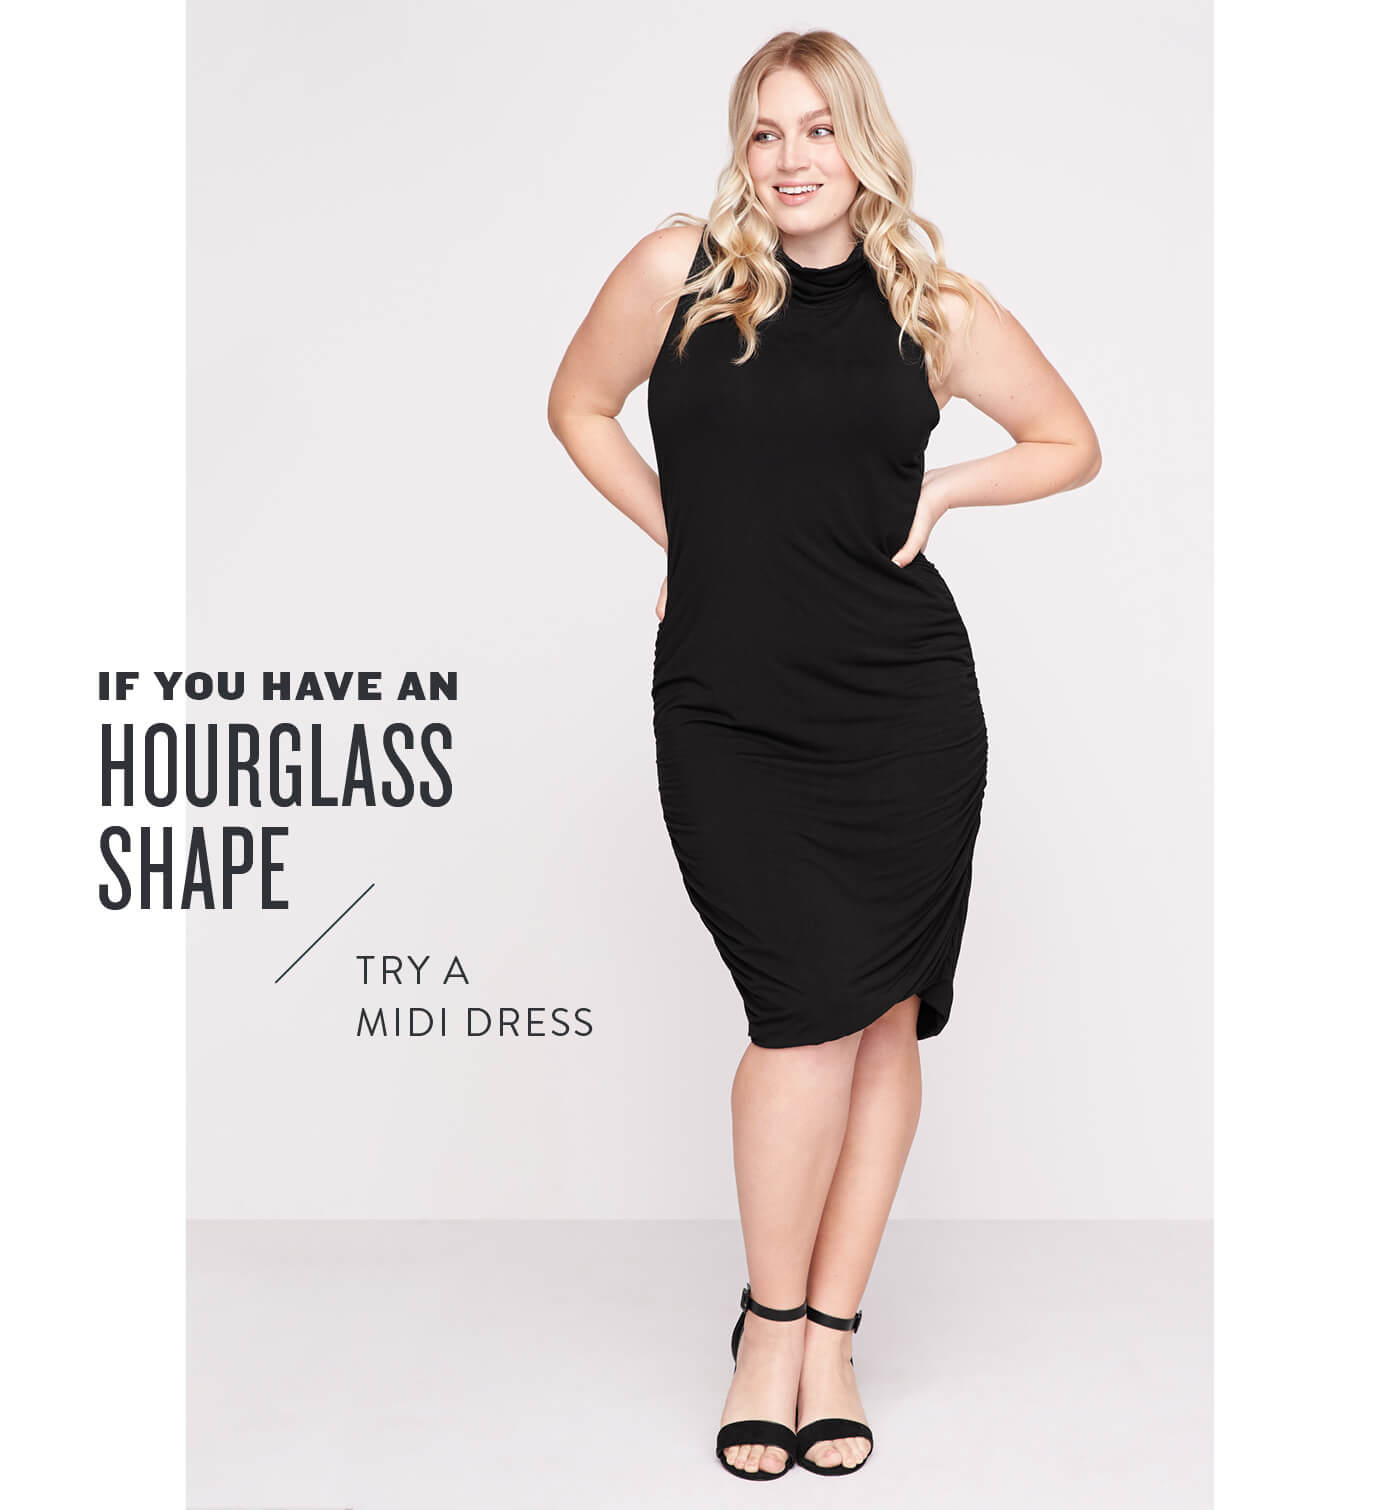 Boxy styles - the new silhouette shape